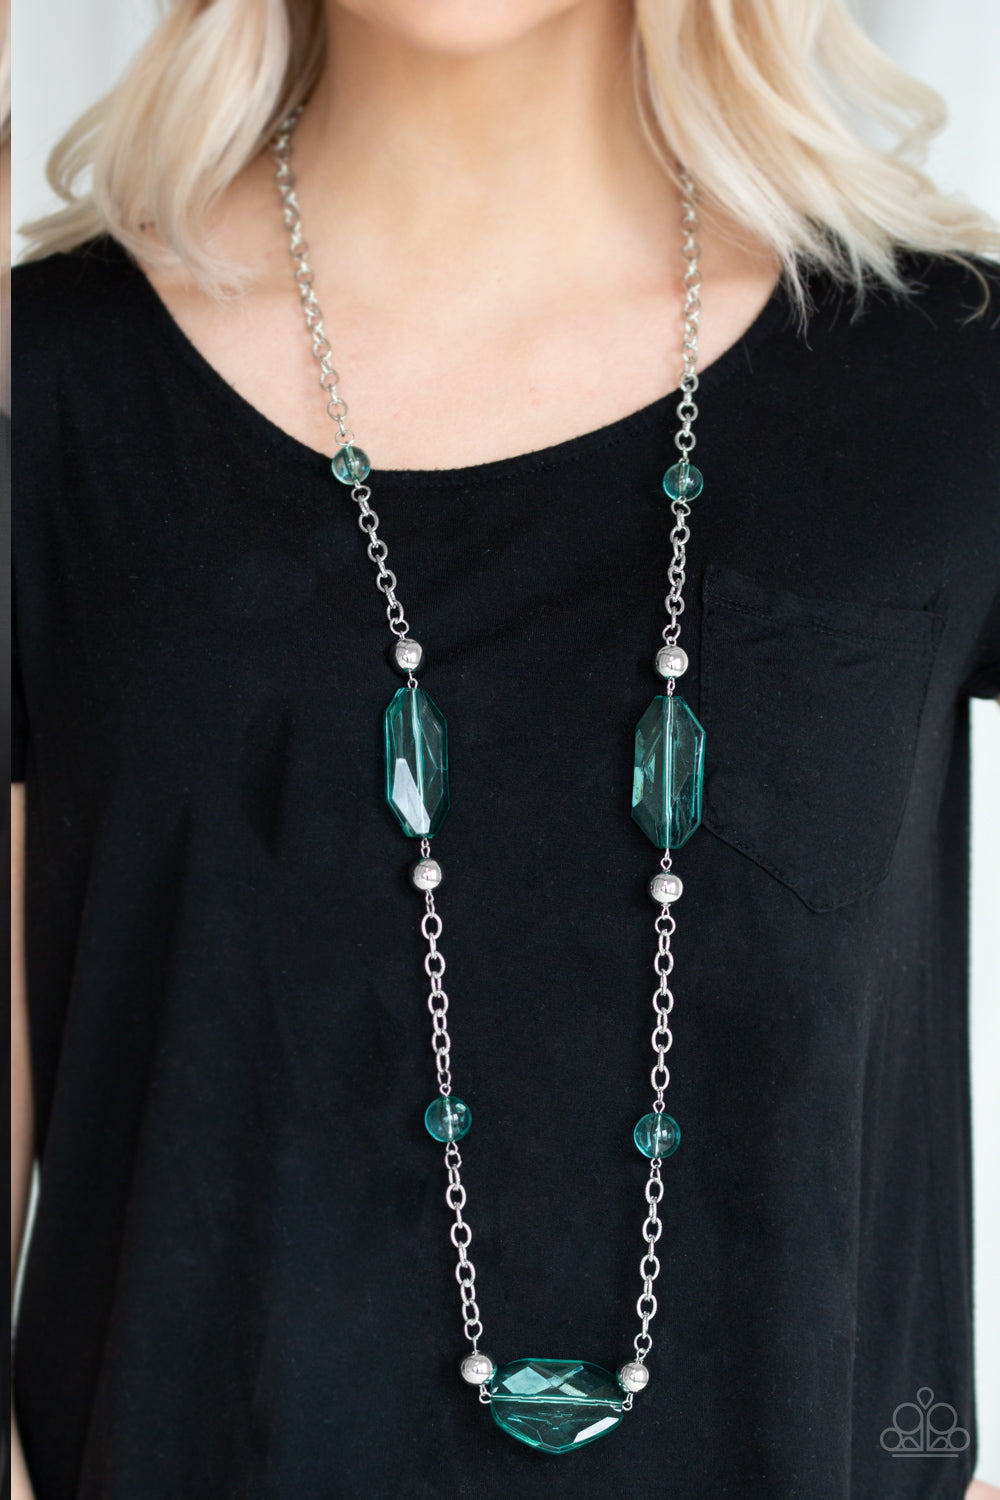 Crystal Charm - Green - Paparazzi Necklace